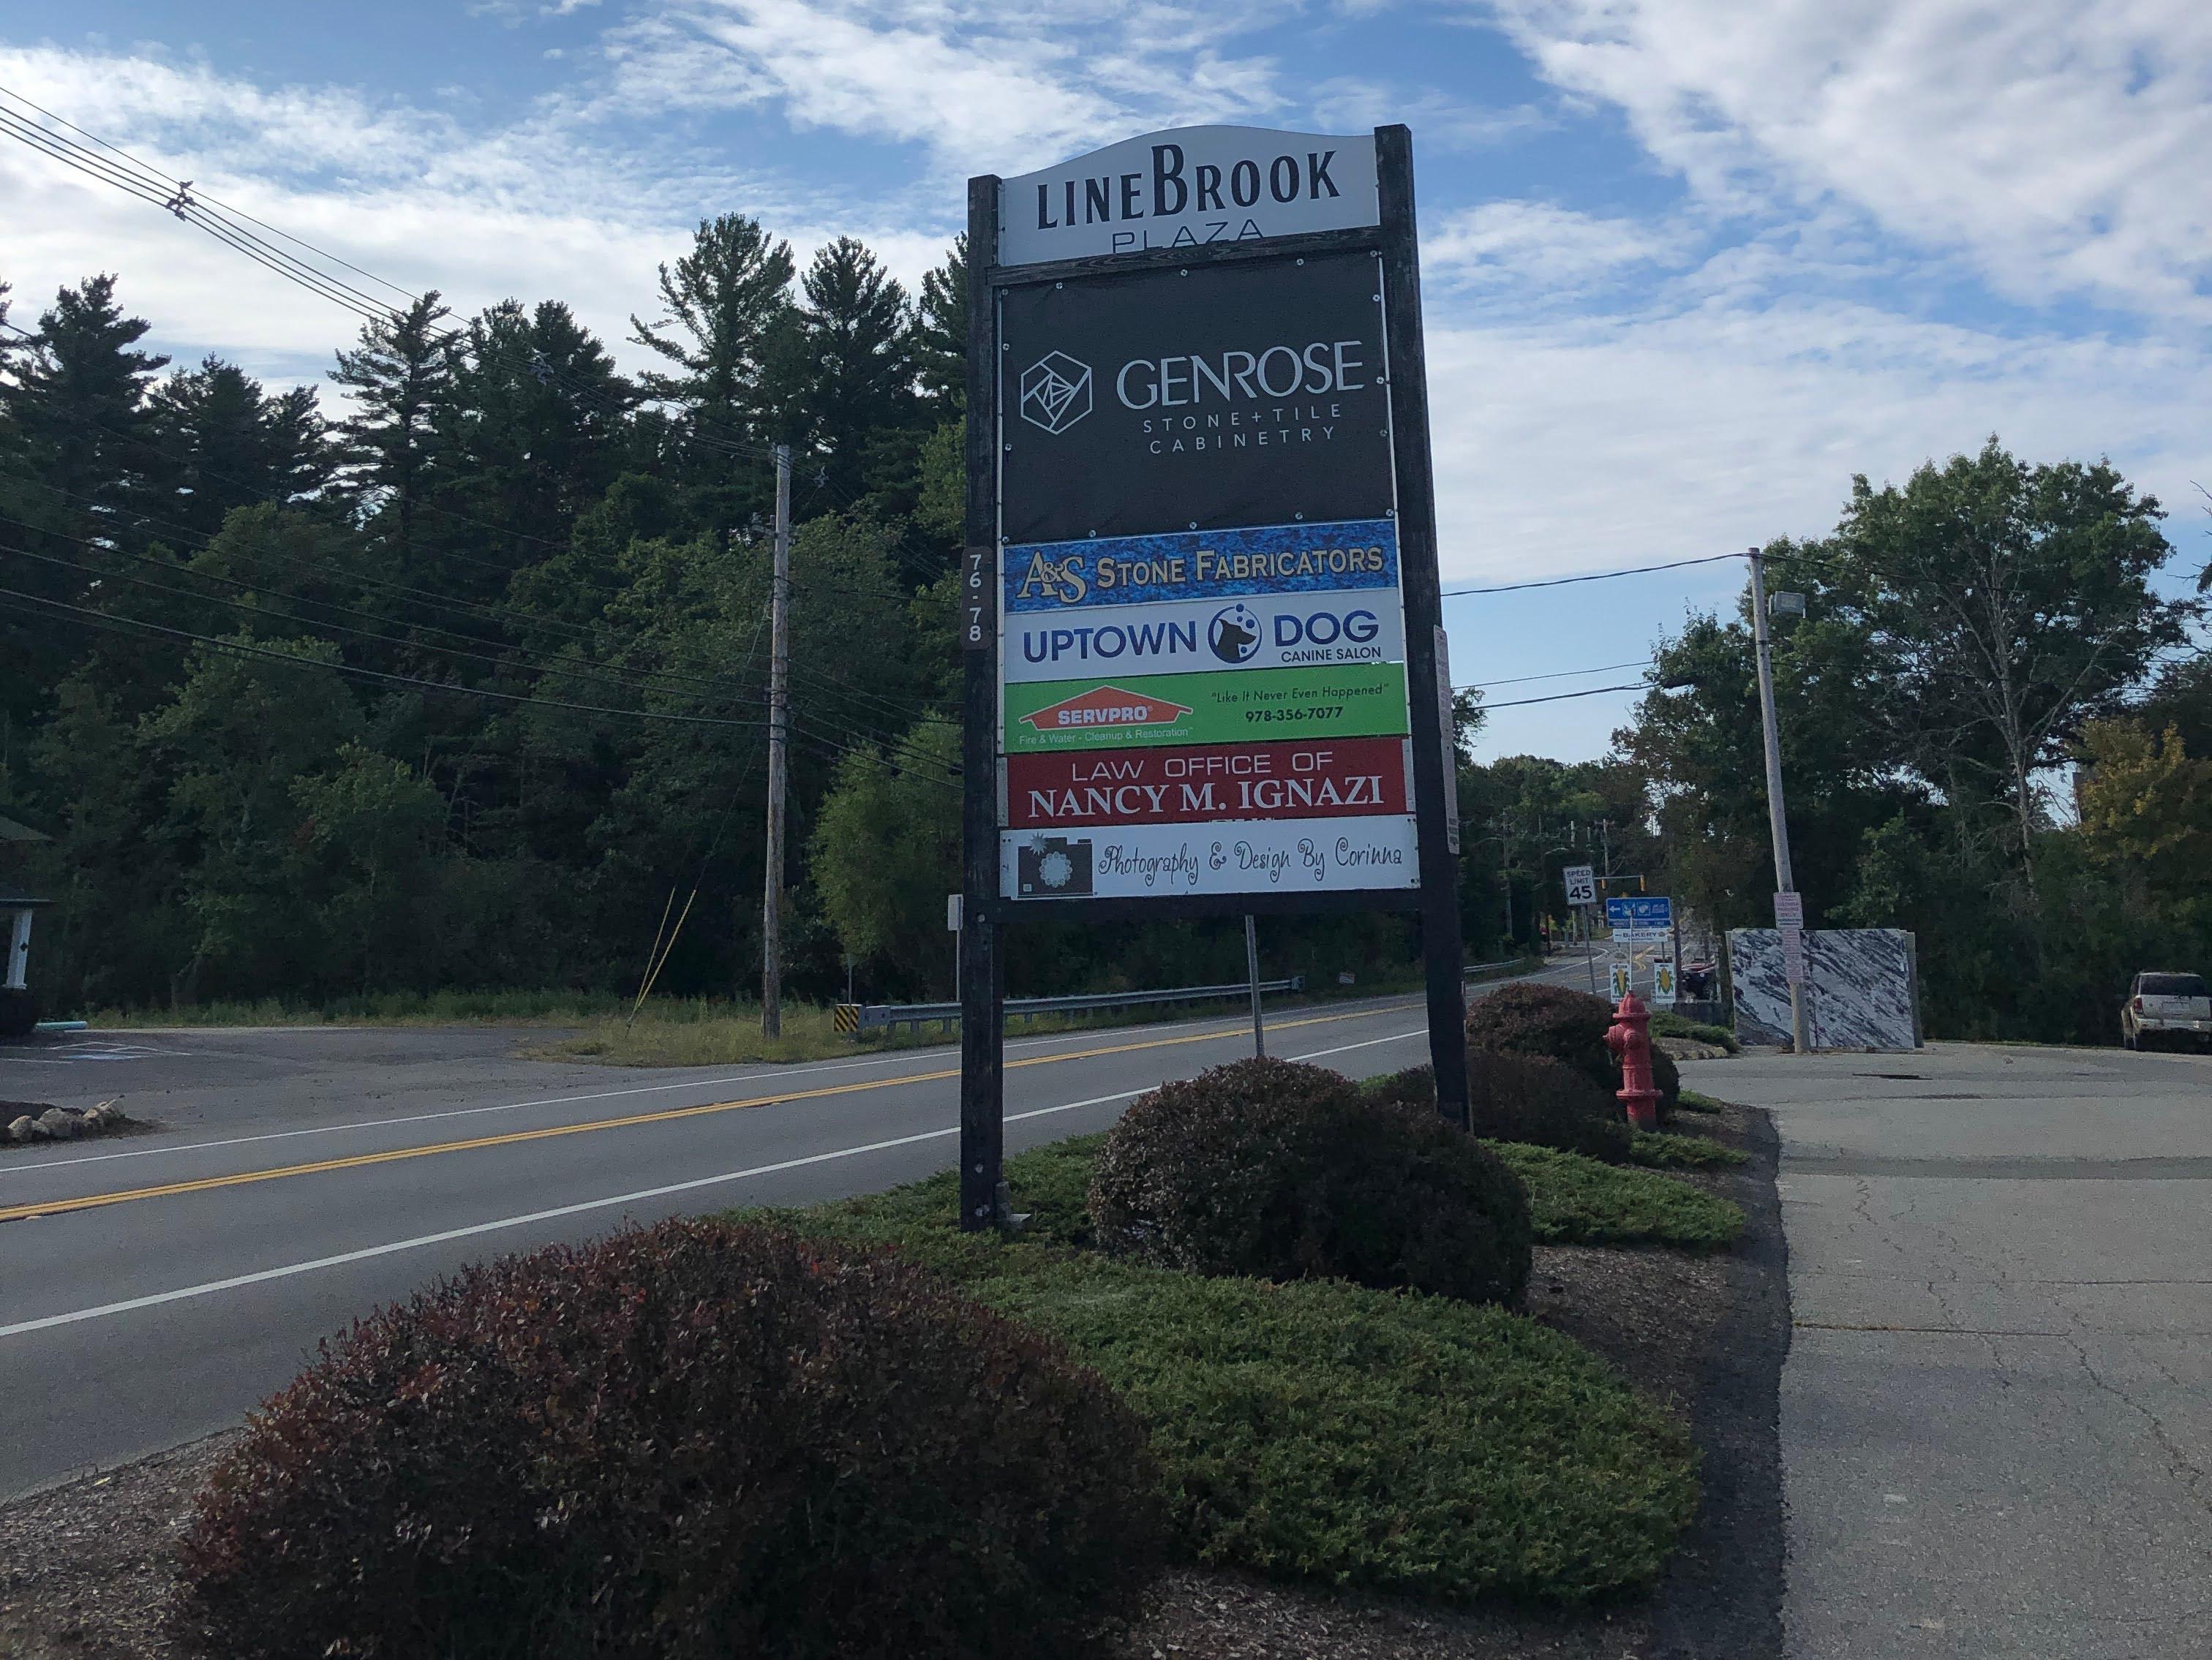 SERVPRO of Danvers/Ipswich is located within Ipswich's Linebrook Plaza, at 78 Turnpike Road. Located on Route 1 between Cumberland Farms and Tractor Supply Company, our office is above Genrose Stone, Tile, and Cabinetry, and Uptown Dog pet salon in Unit G.